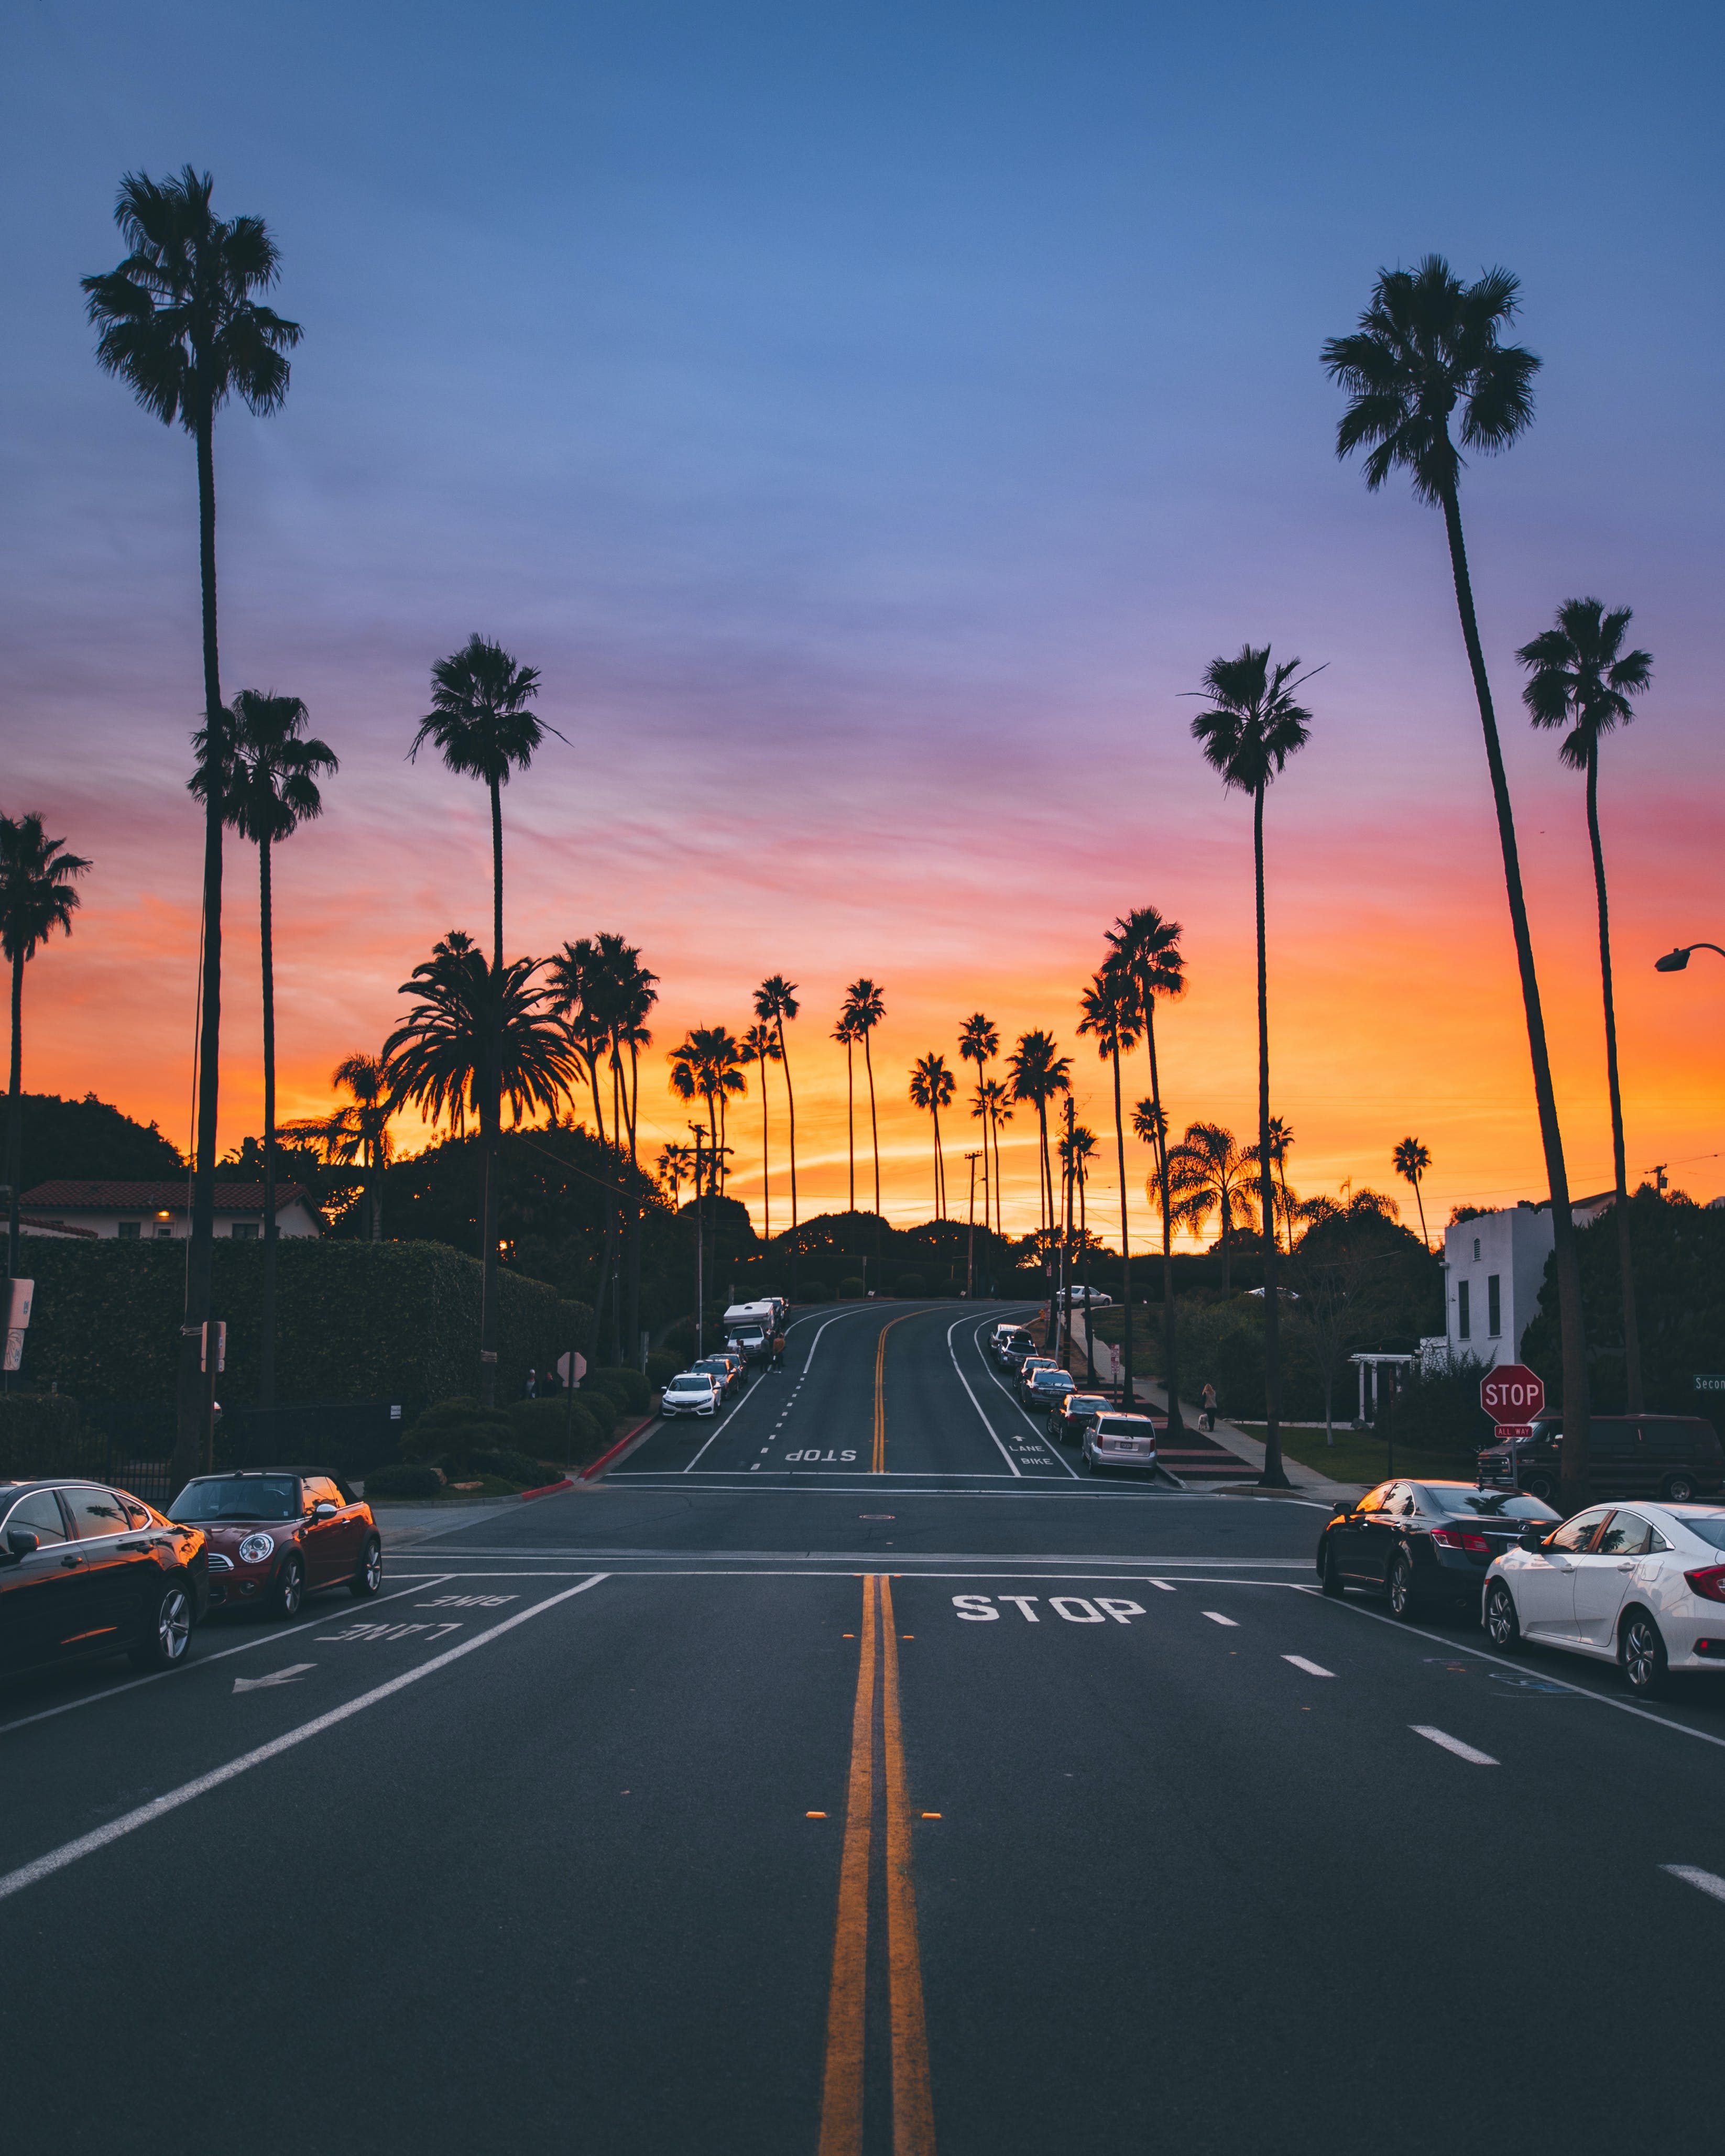 A sunset view of a street lined with palm trees in California. - Travel